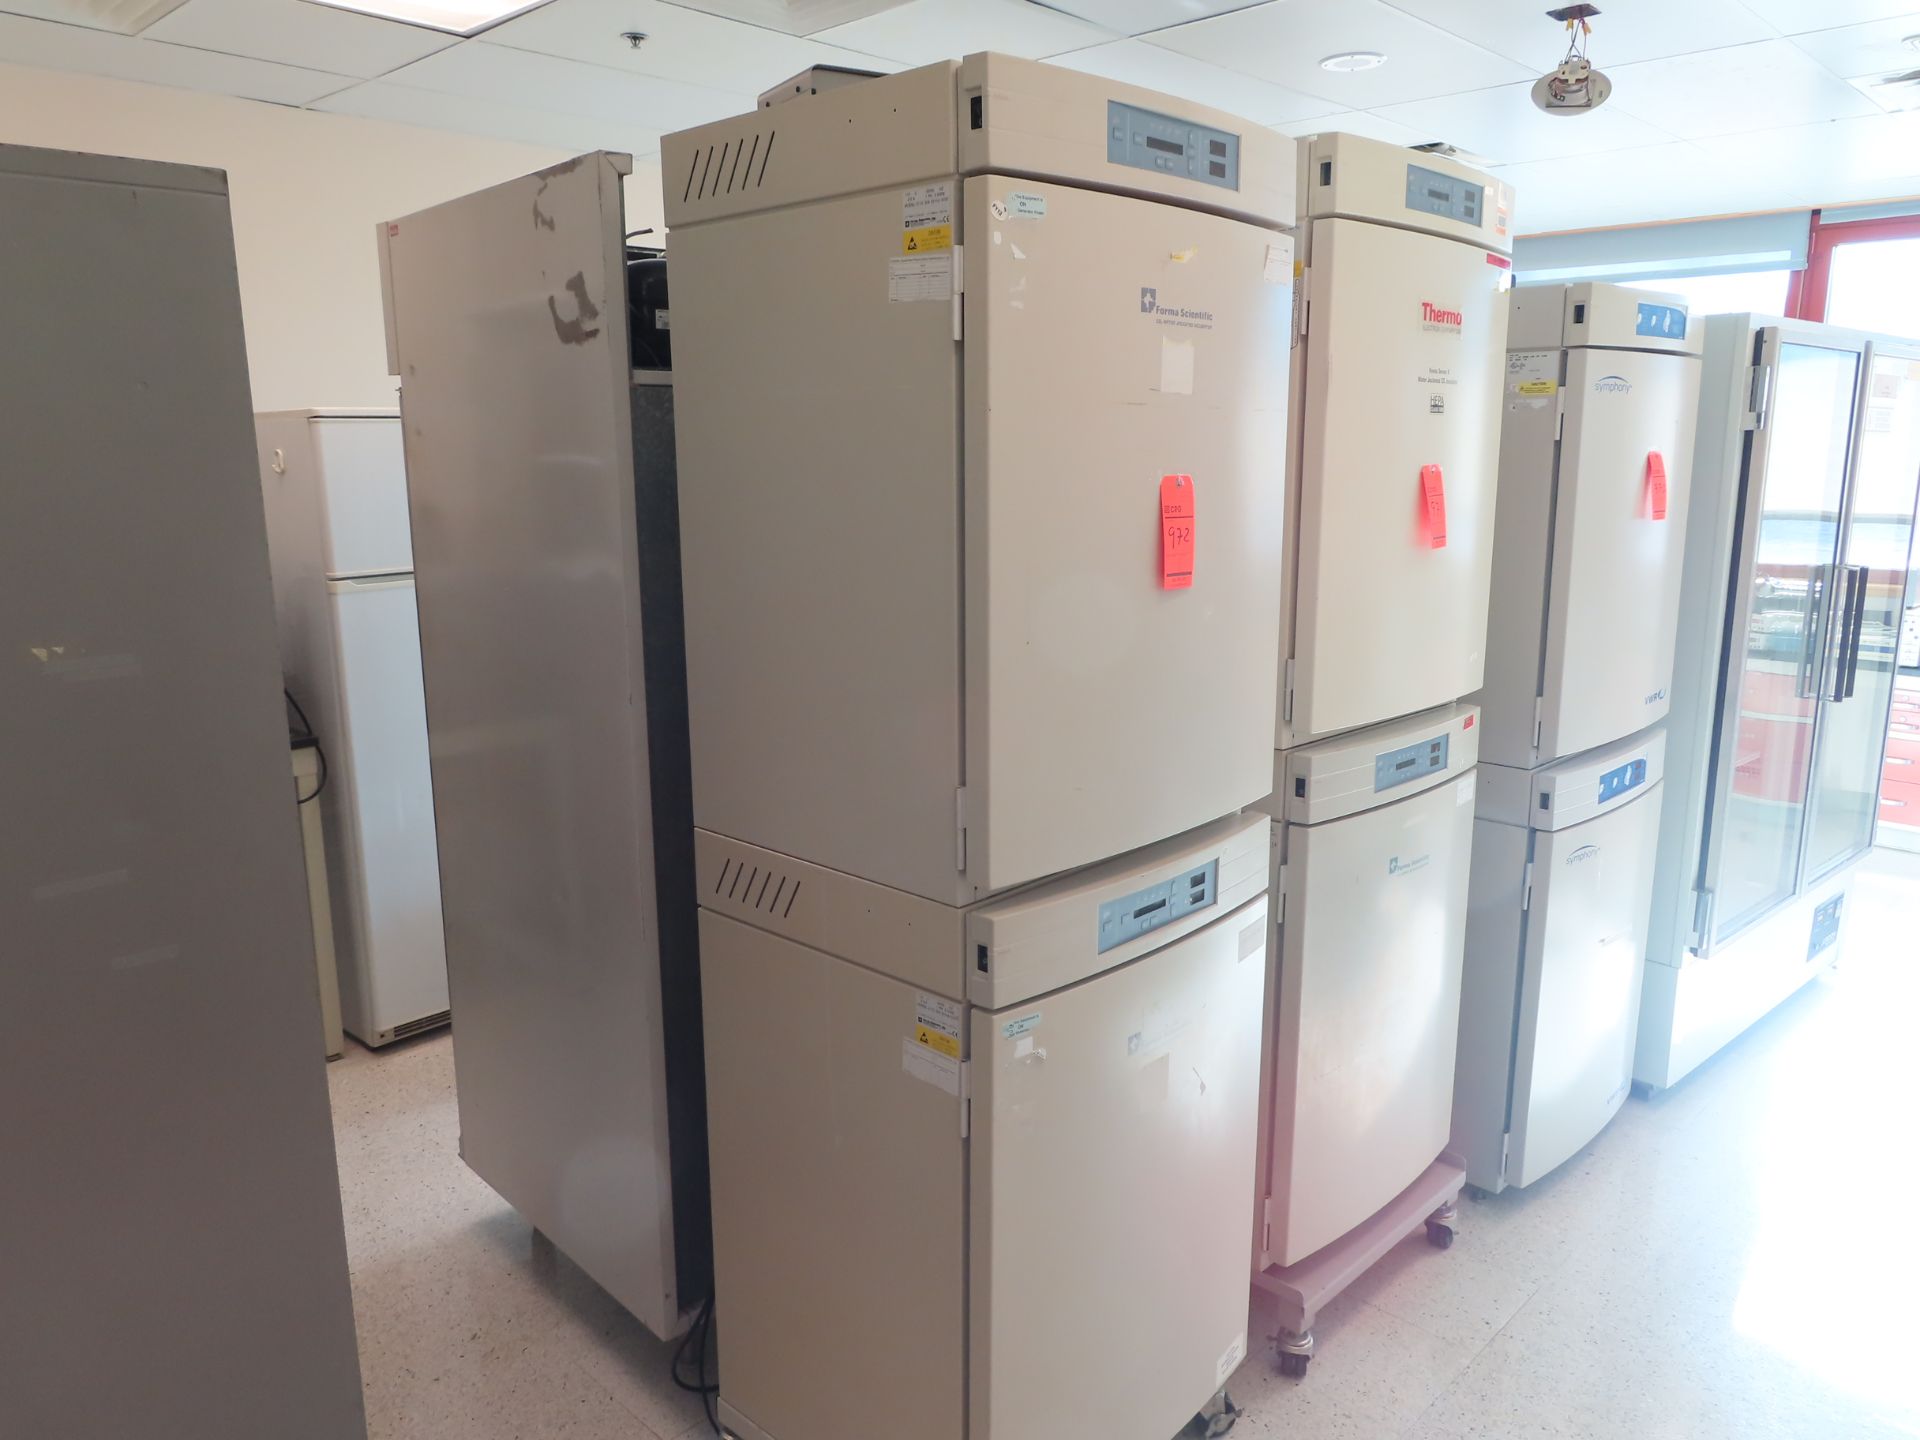 Lot of (2) Farma mopdel 3110 water jacketed CO2 incubators, located in D wing, 3rd floor, room 386A